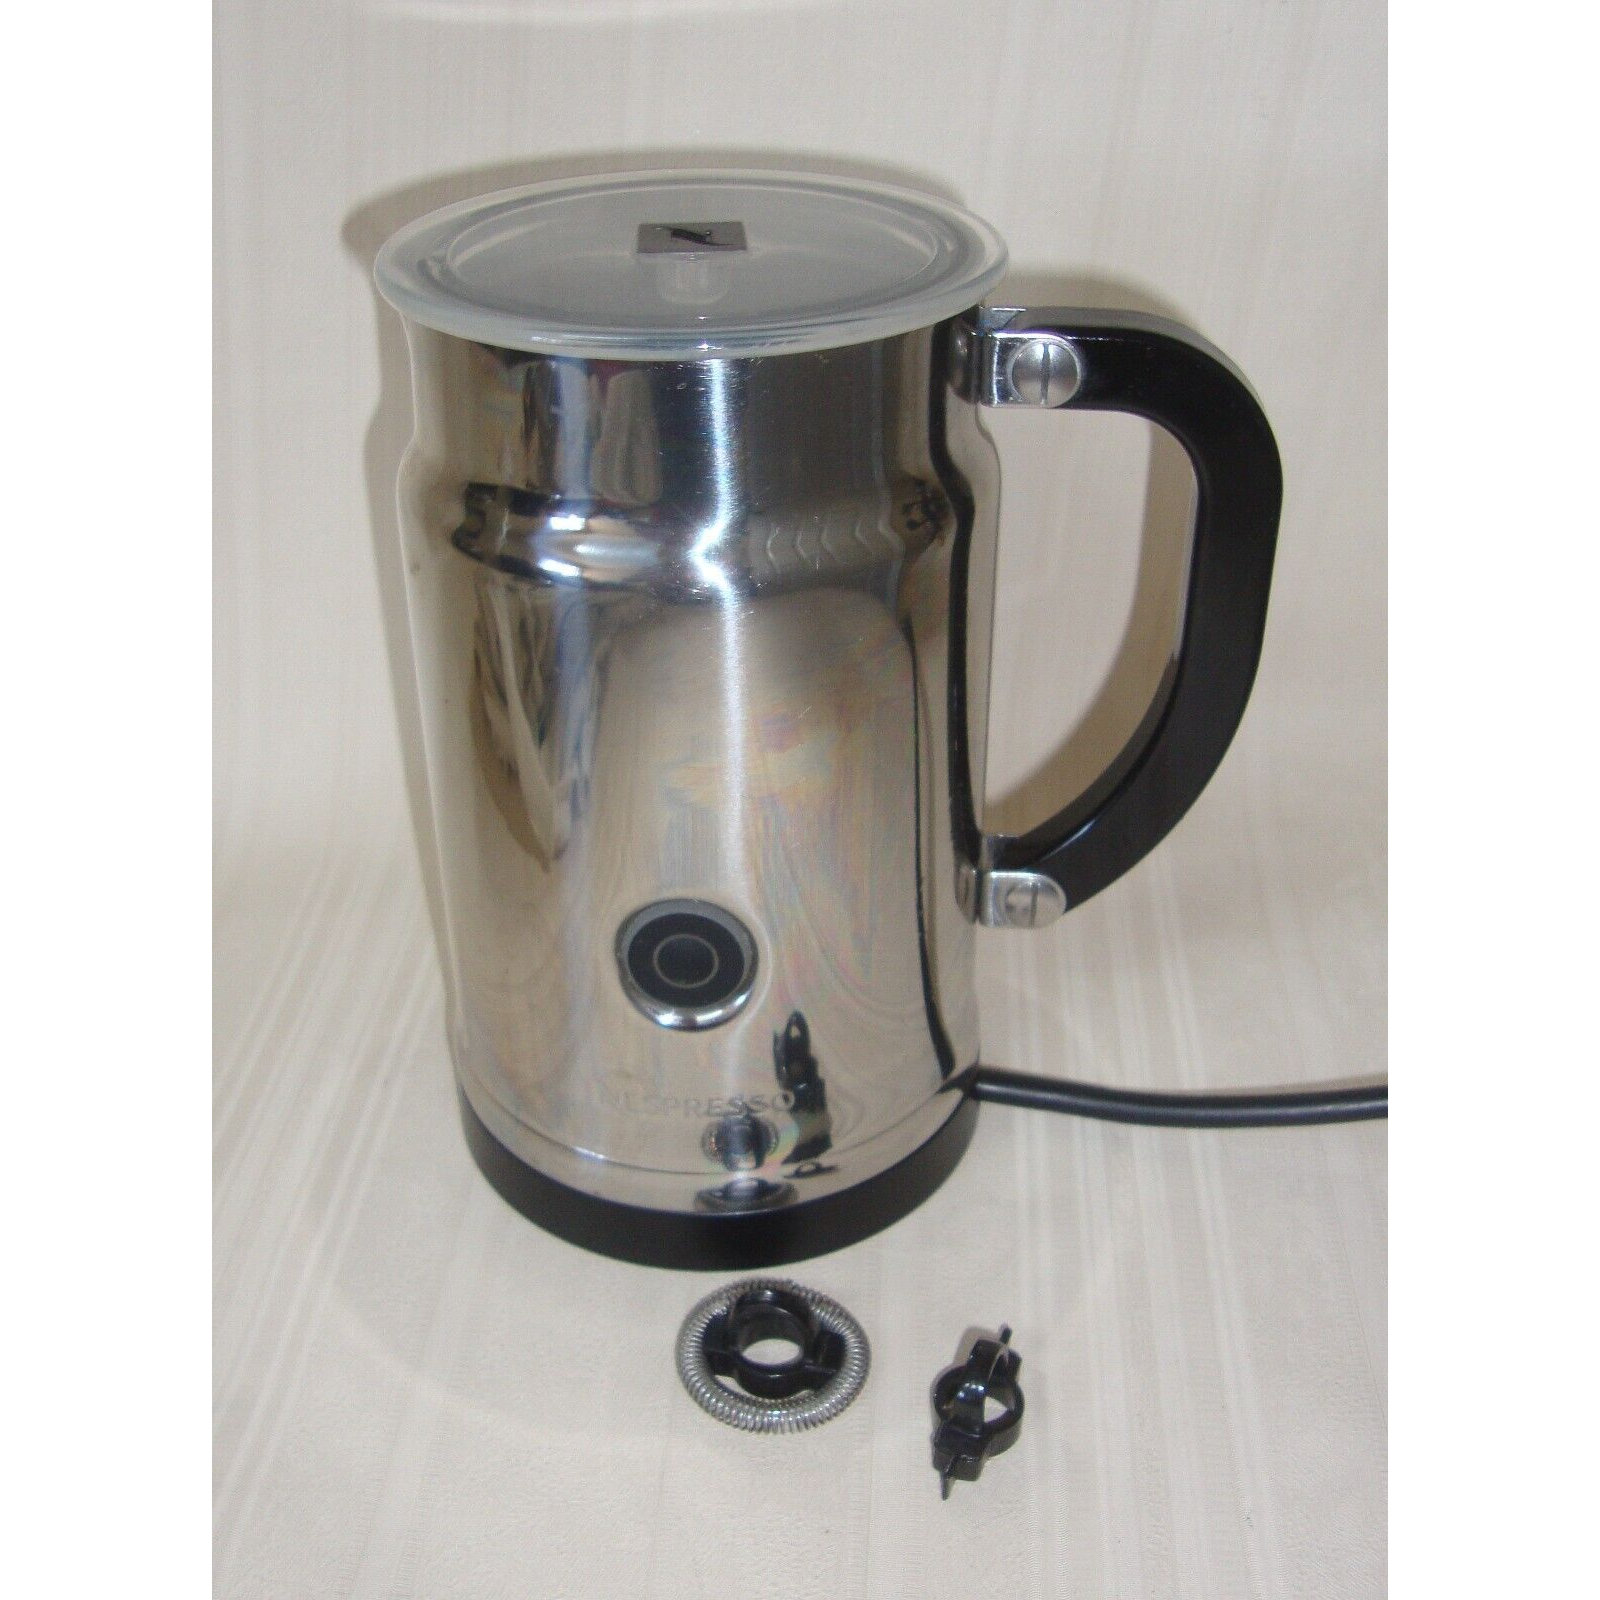 Nespresso Aeroccino Milk Frother 3192 Stainless Tested